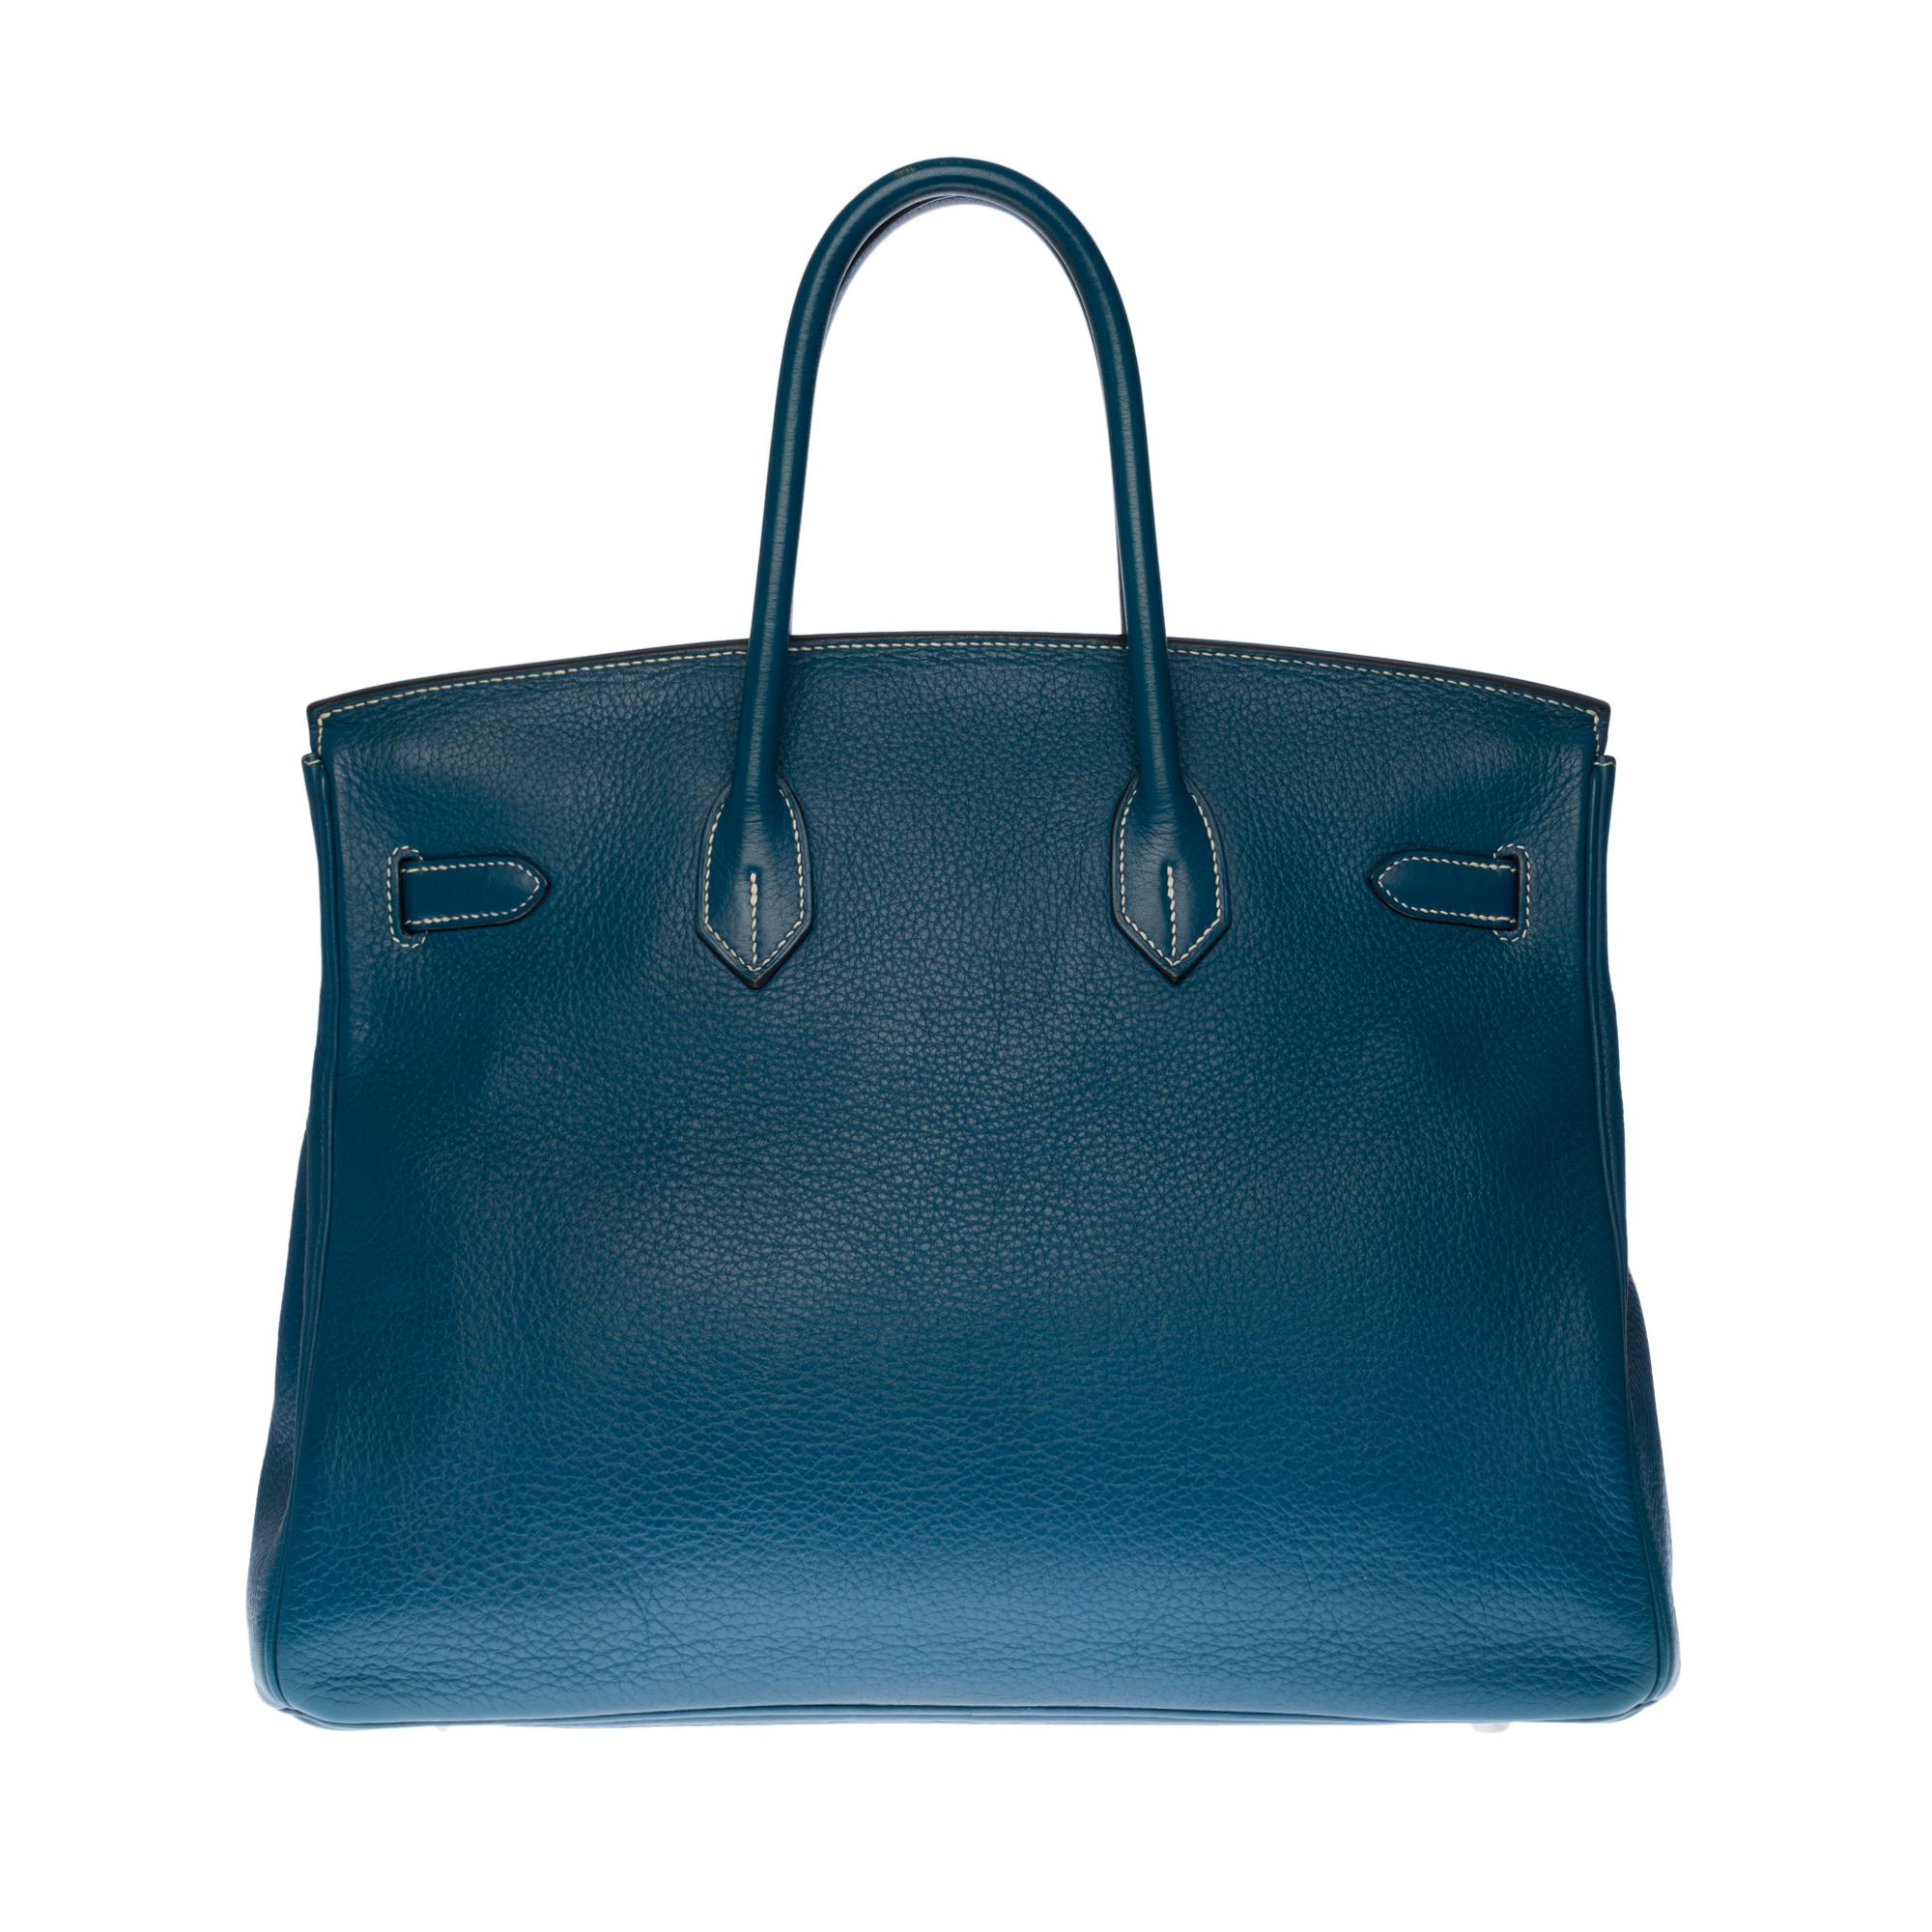 Stunning Hermes Birkin 35 cm handbag in Thalassa blue Taurillon leather with white stitching, palladium silver metal hardware, double handle in blue leather allowing a handheld
Closure by flap
Lining in blue leather, a zipped pocket, a patch